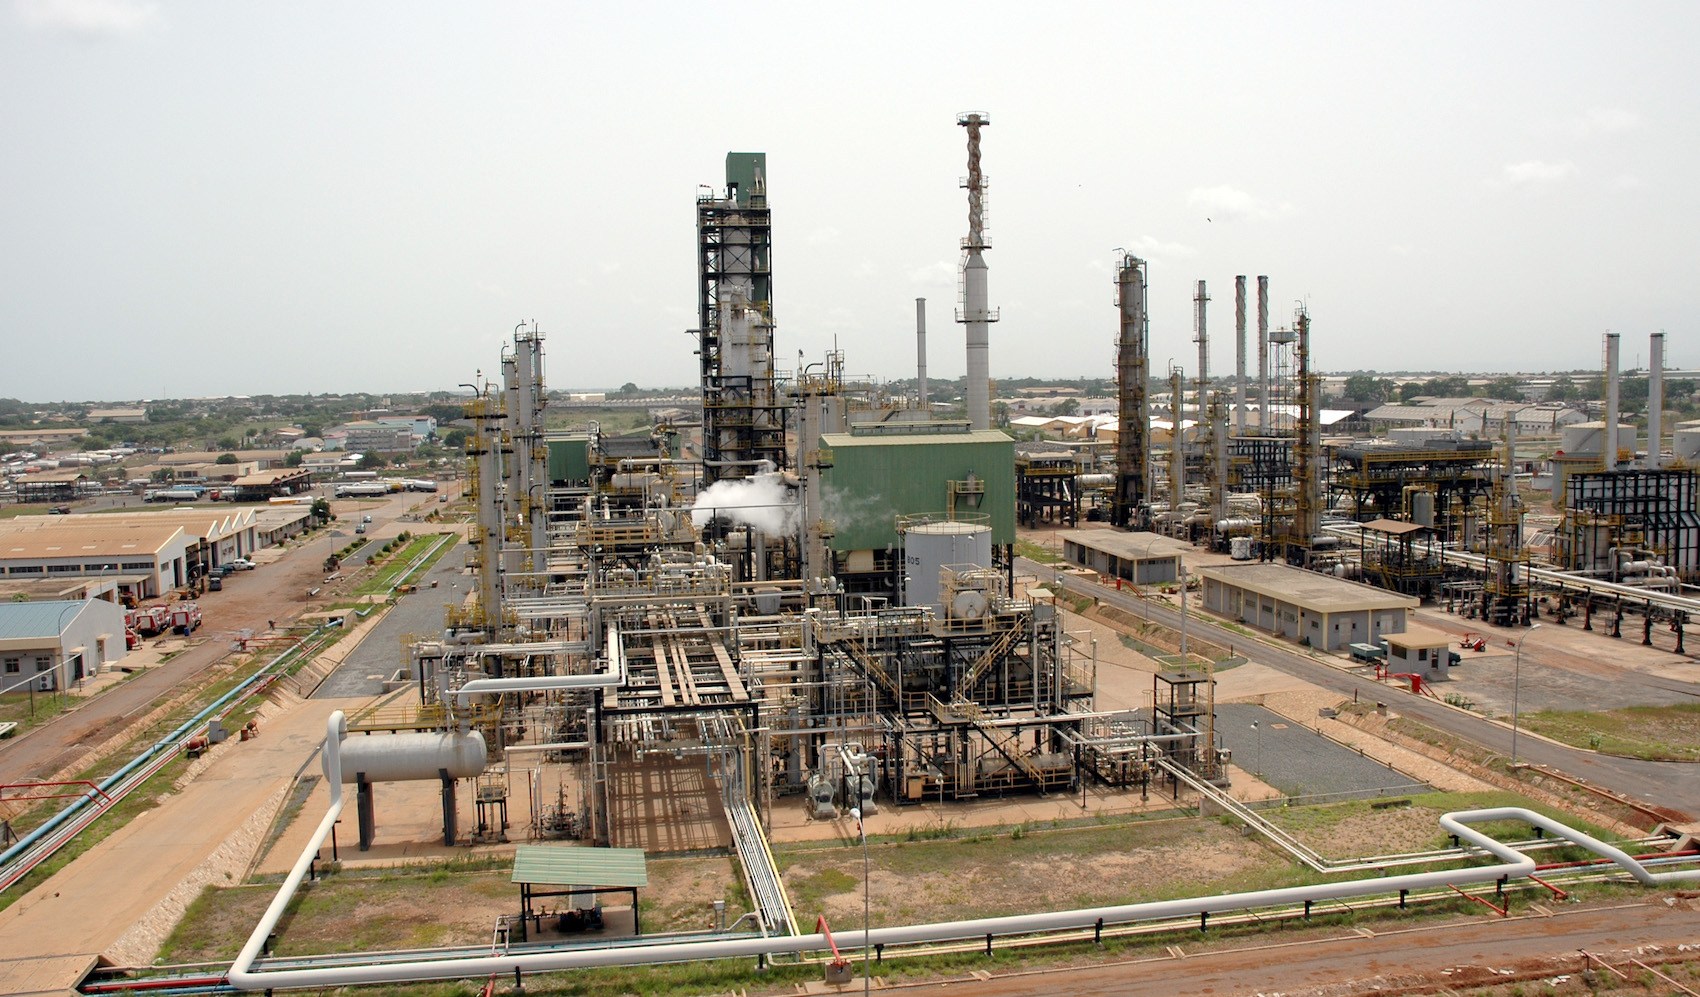 GHANA: GAS AND PETROLEUM IMPORT SECTOR FACES FRESH POLITICAL CHALLENGES